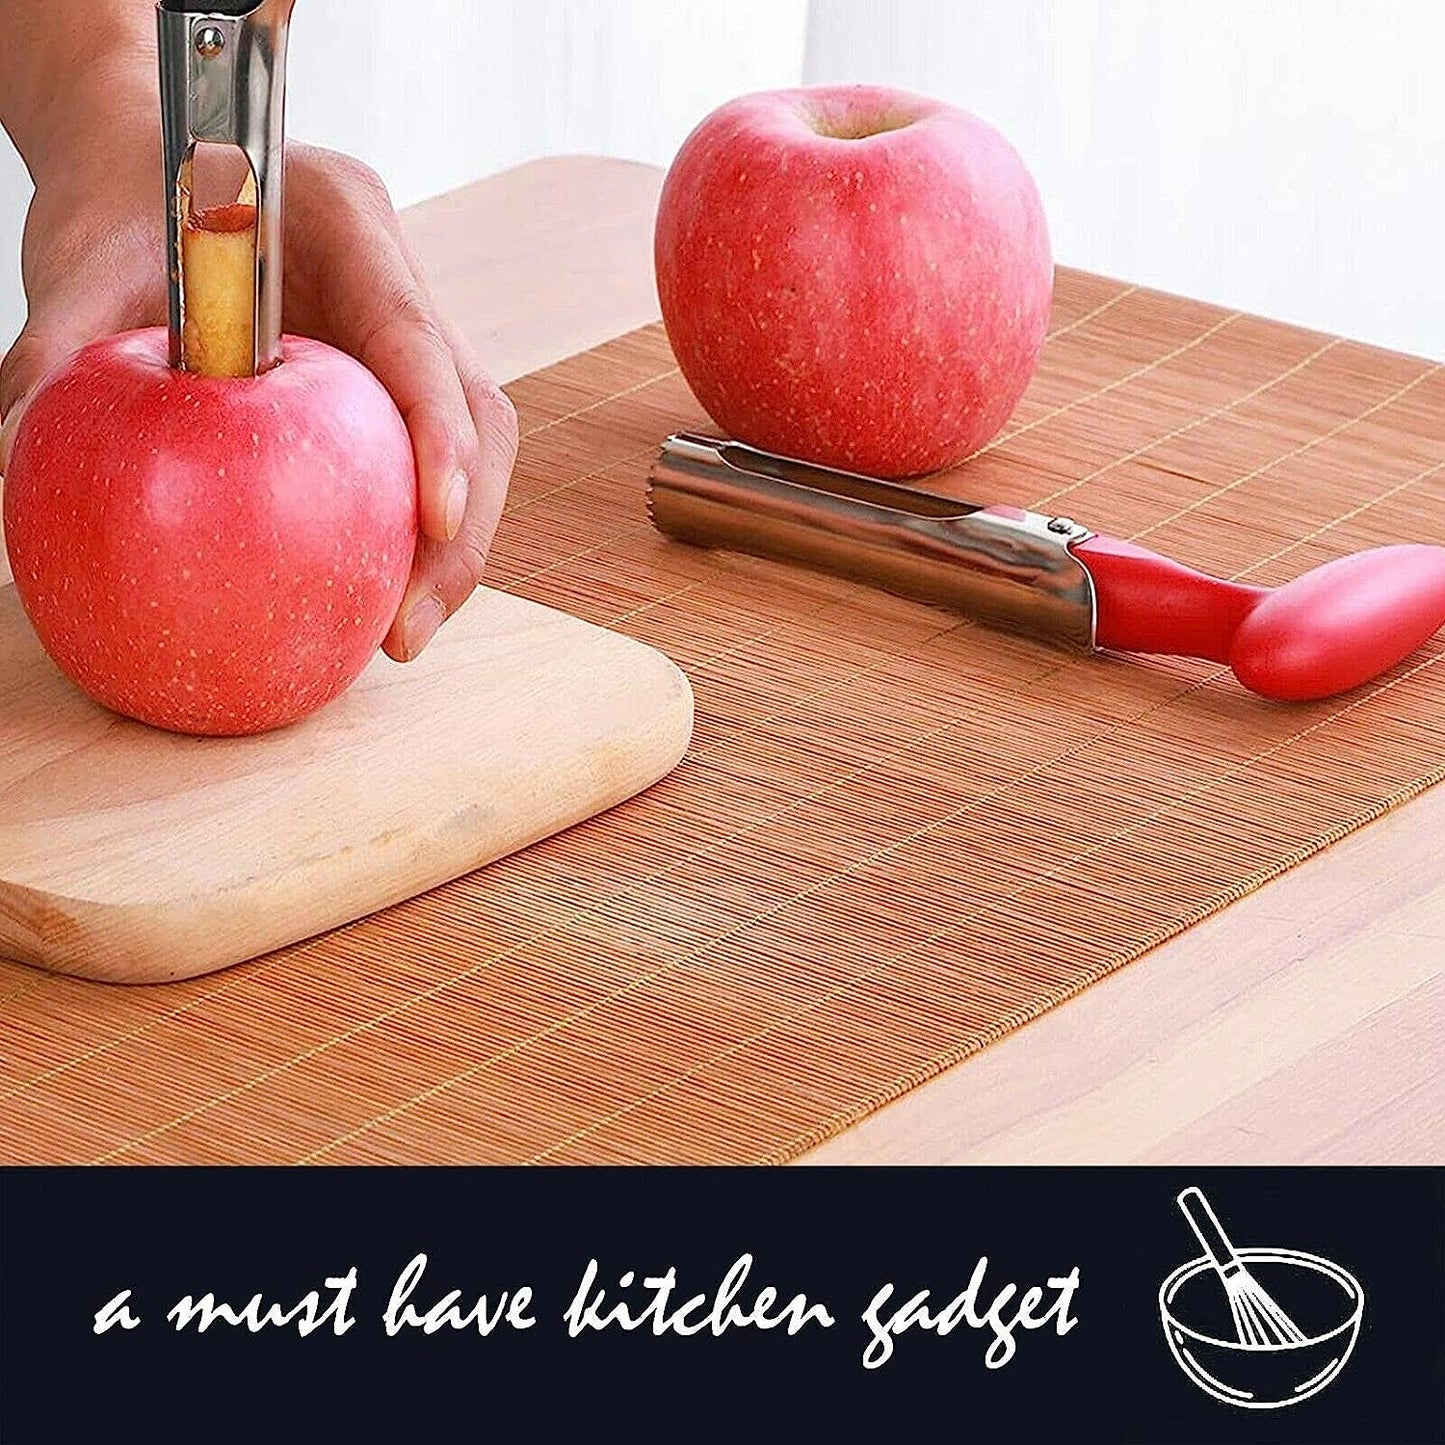 Premium Stainless Steel Durable Apple Corer - Easy to Use Kitchen Gadget